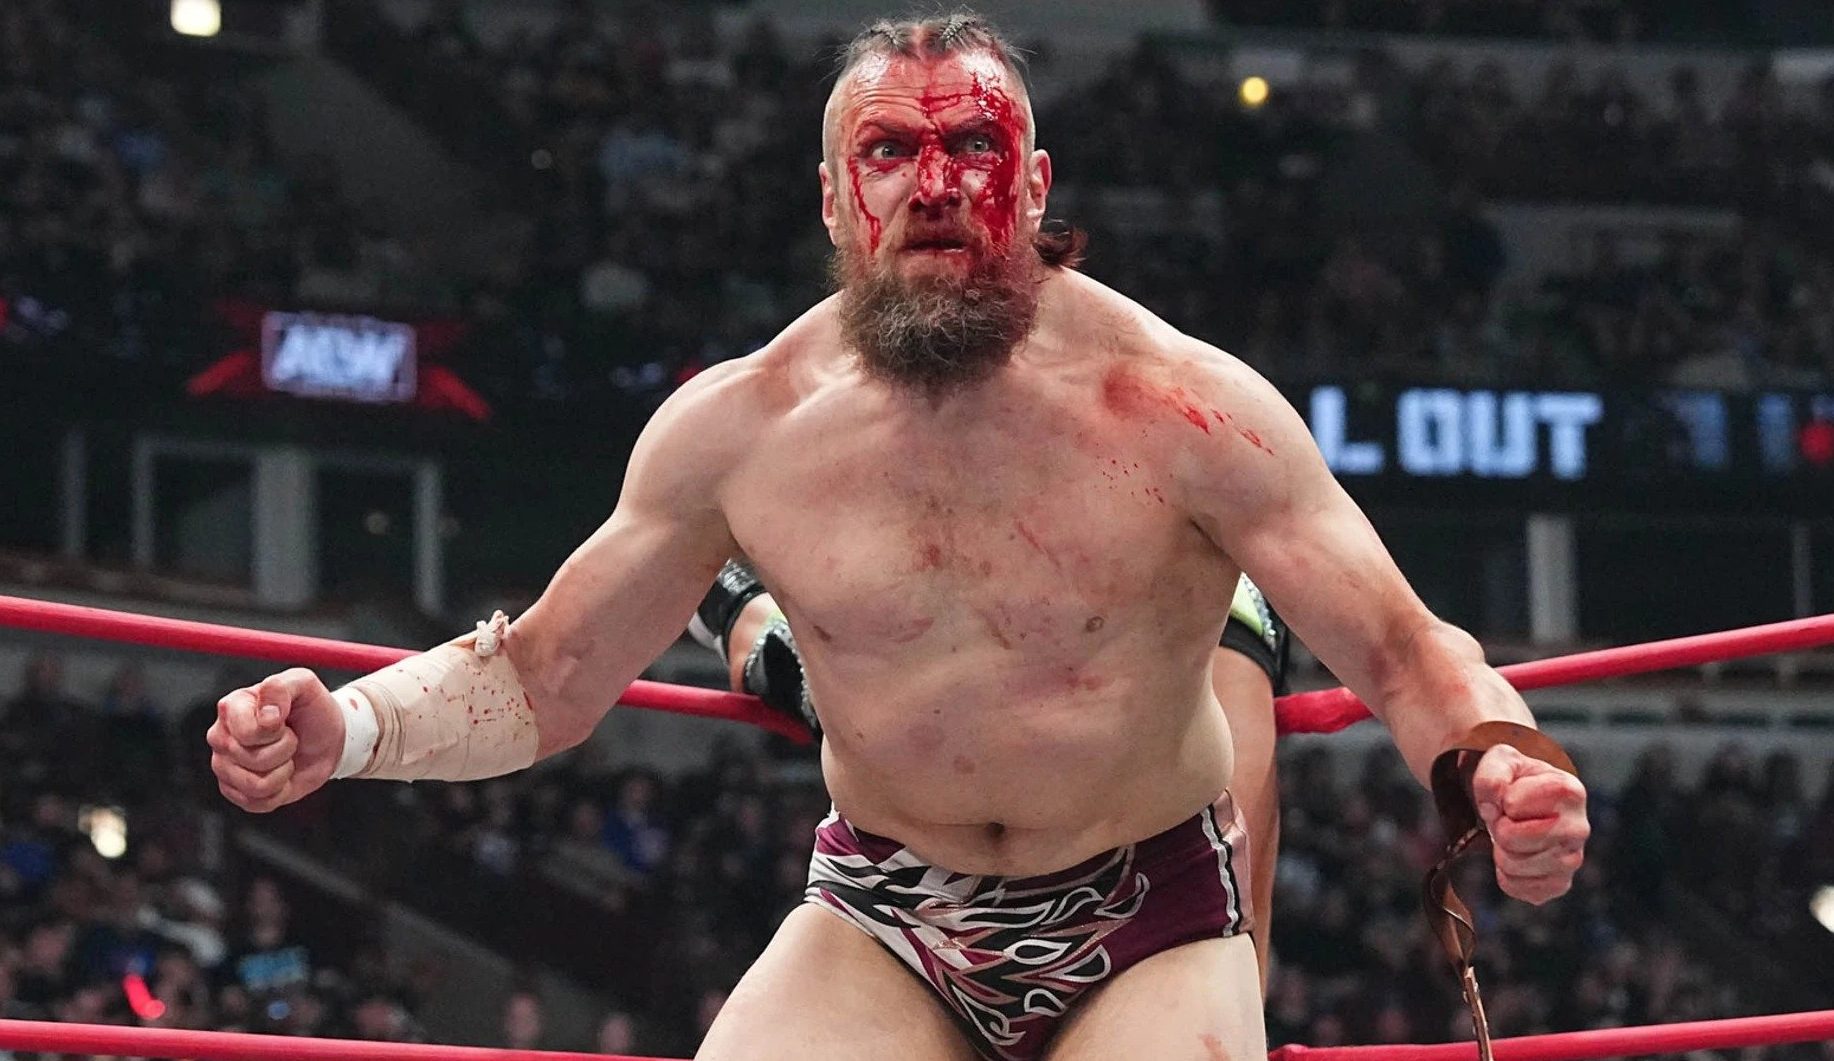 Bryan Danielson Provides More Information On What Comes Next After This Run